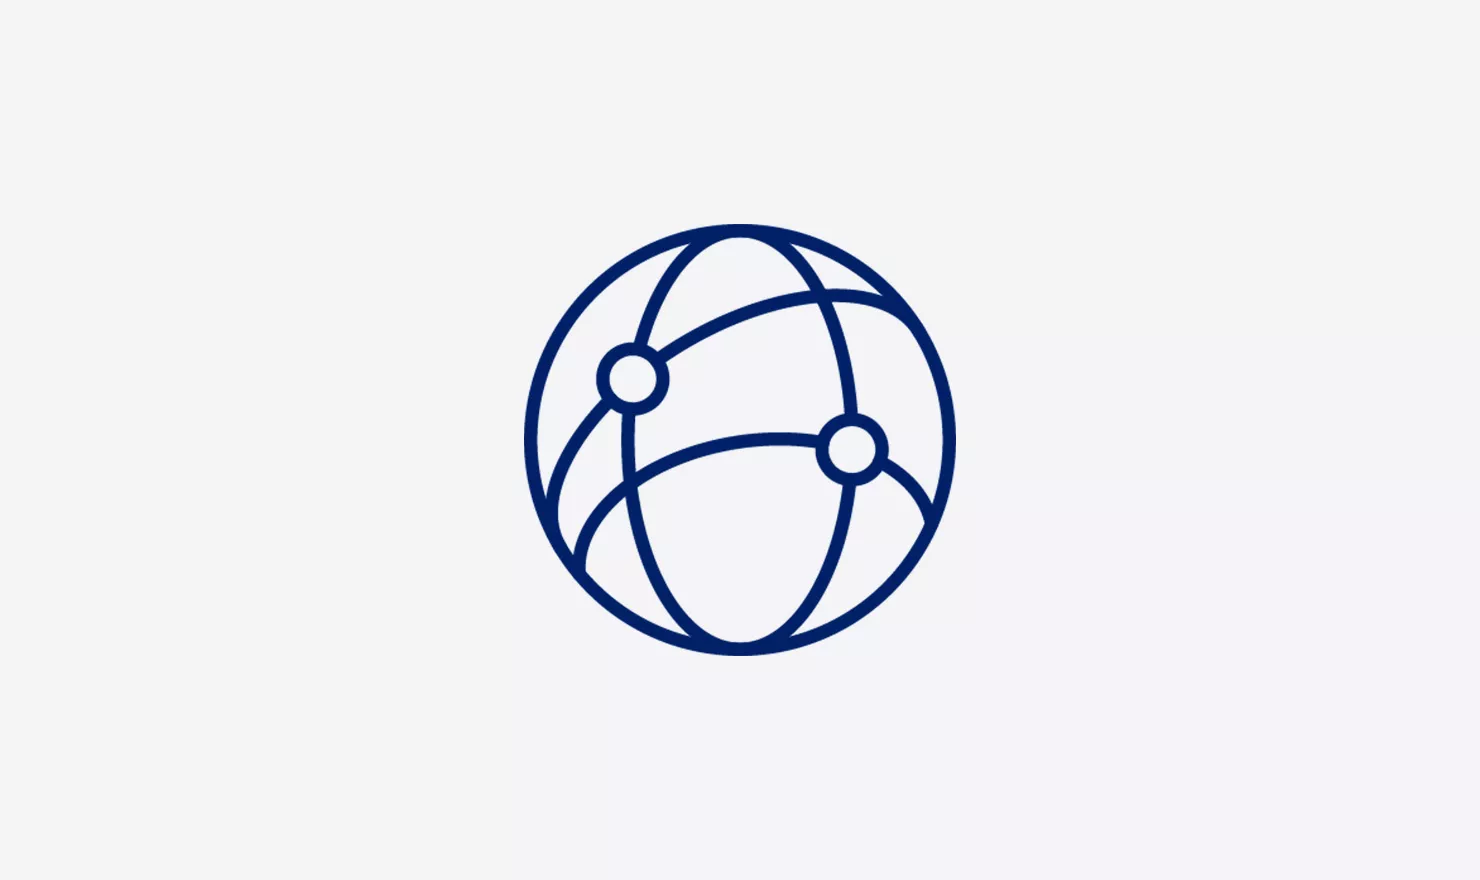 Blue outline icon of a globe